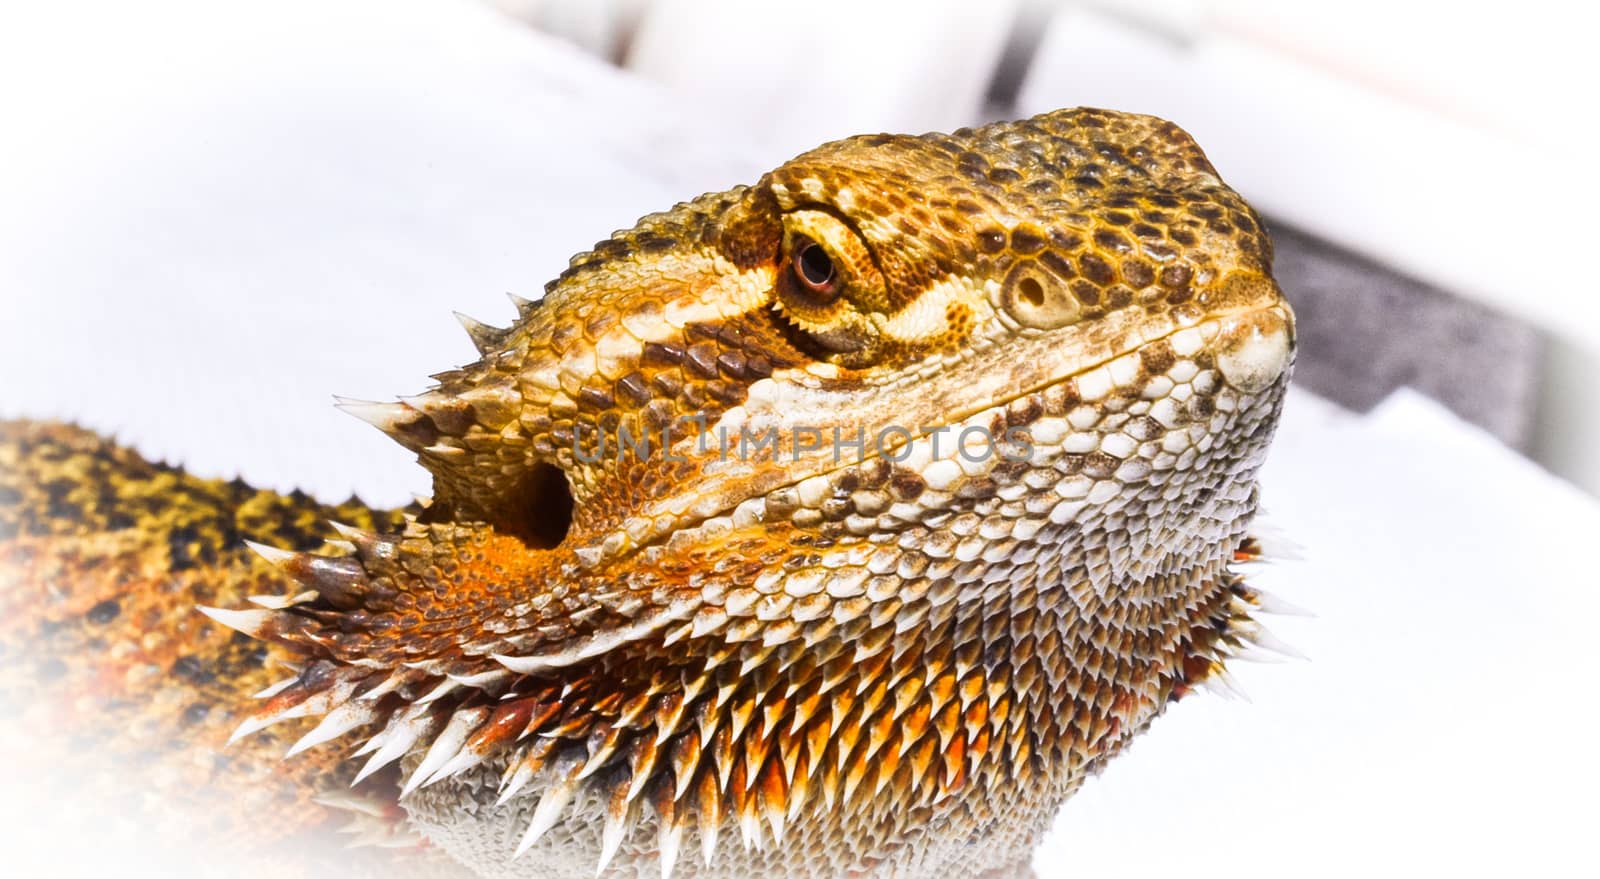 Pet German Giant Bearded Dragon, sunning himself outdoors, close up detail of head. by valleyboi63